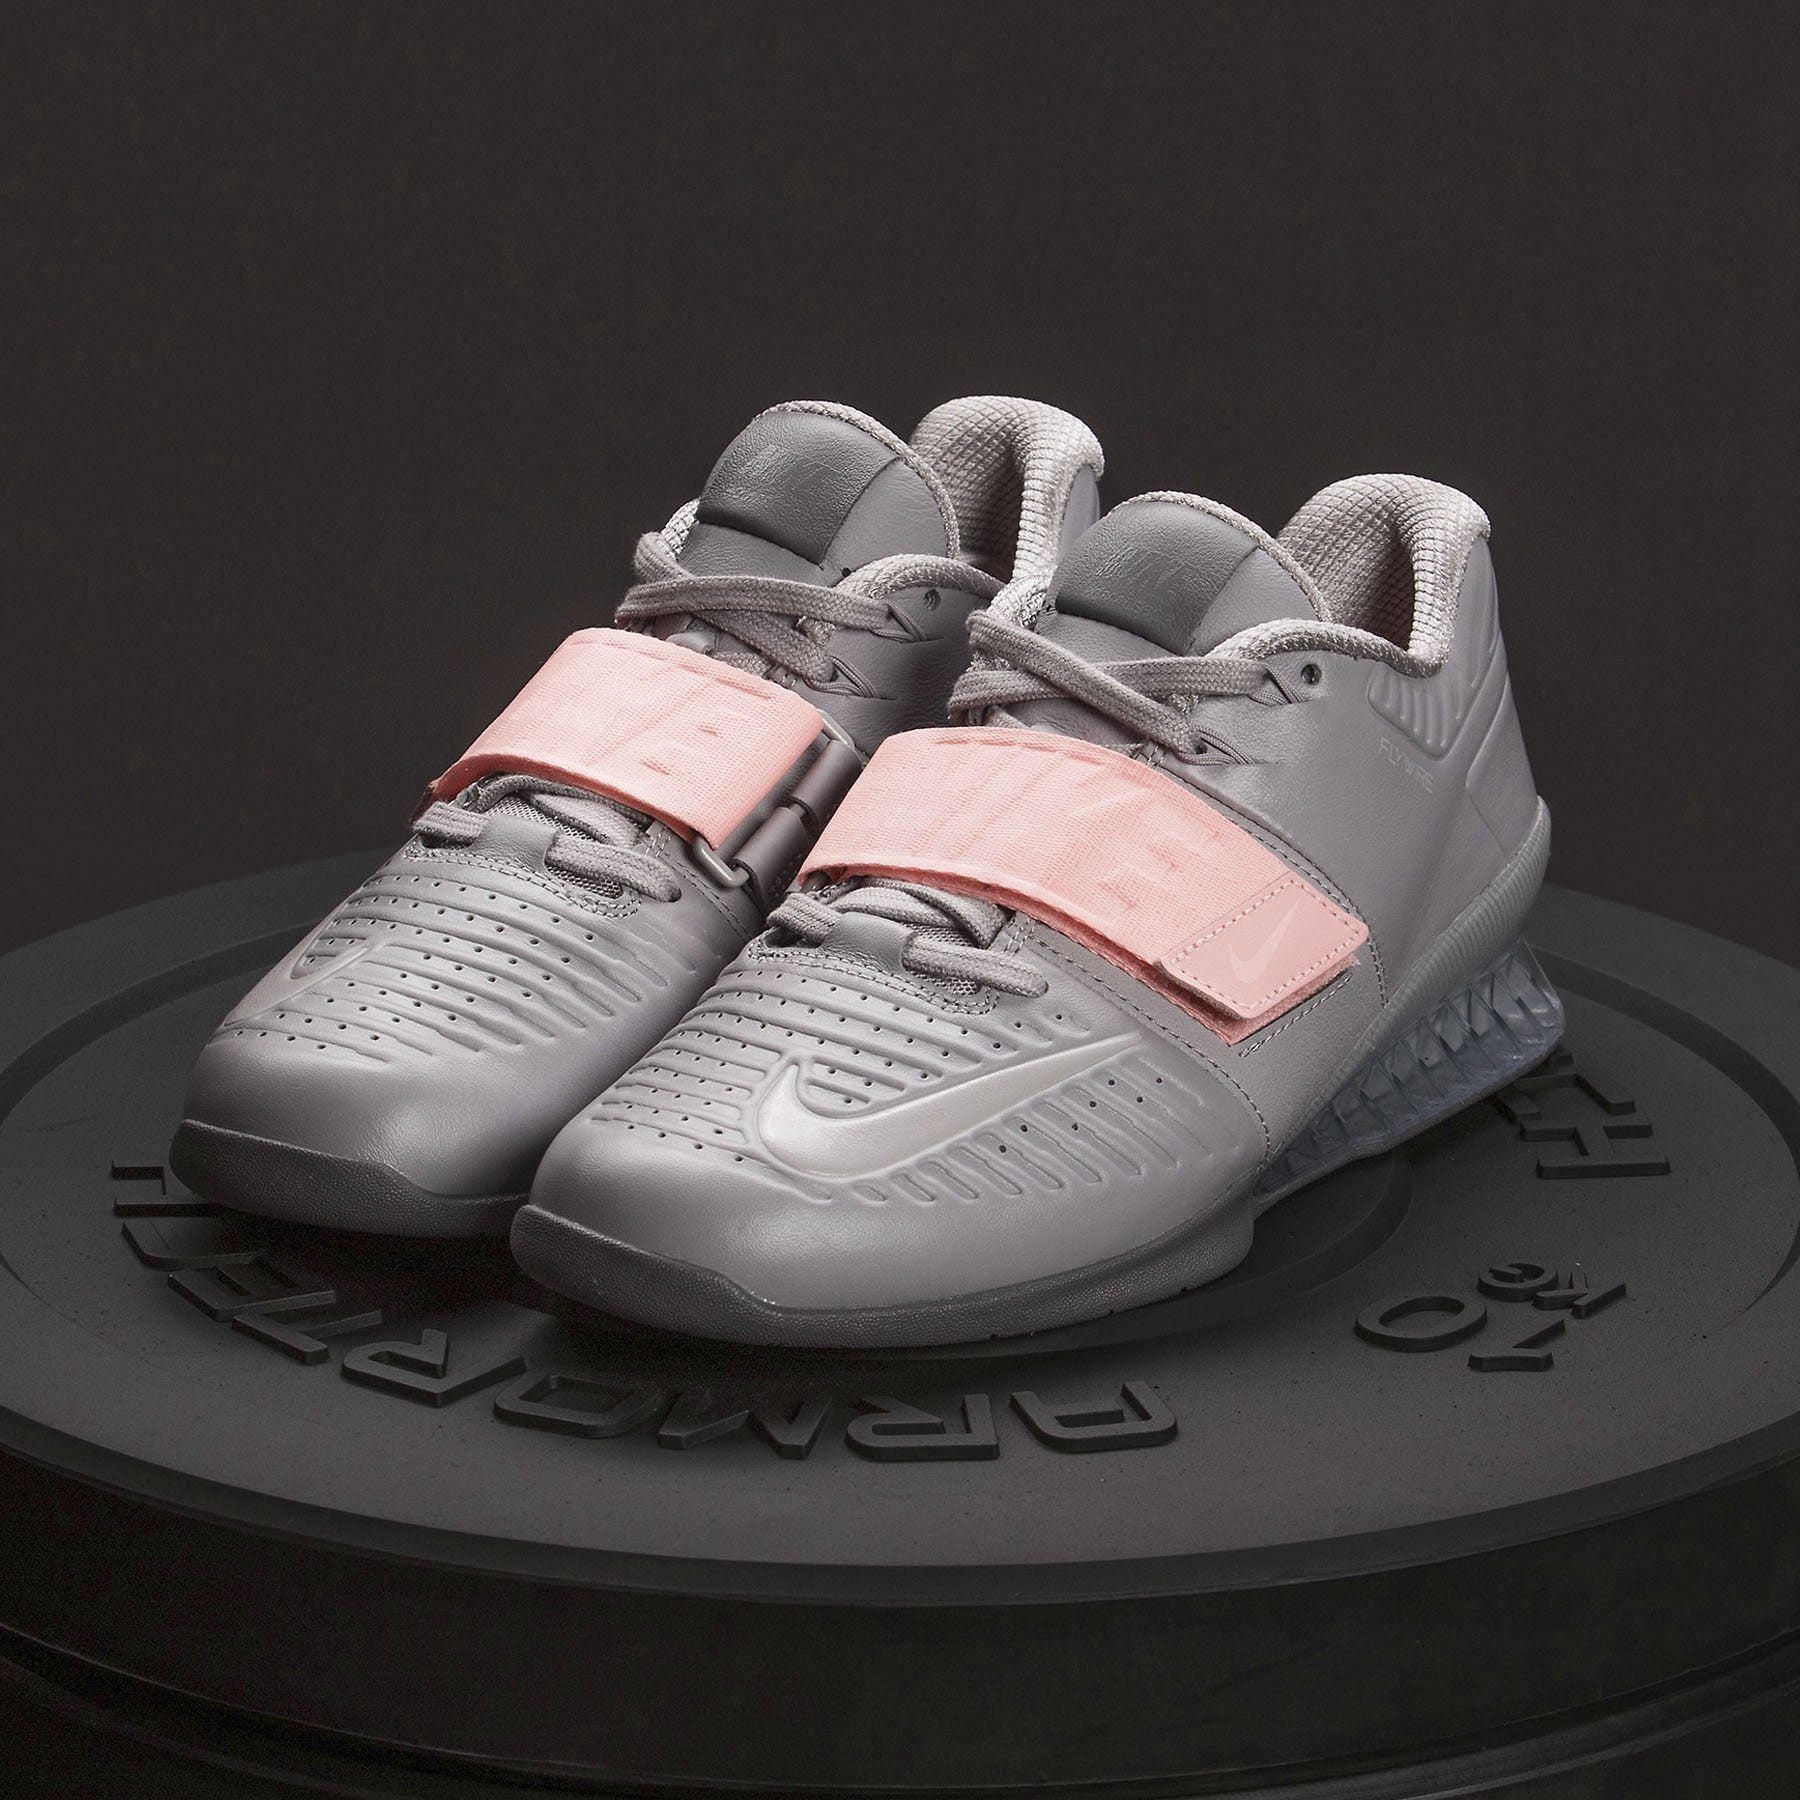 Nike - Romaleos 3 Women's Shoes Grey/Pink – foreverspin546546.com